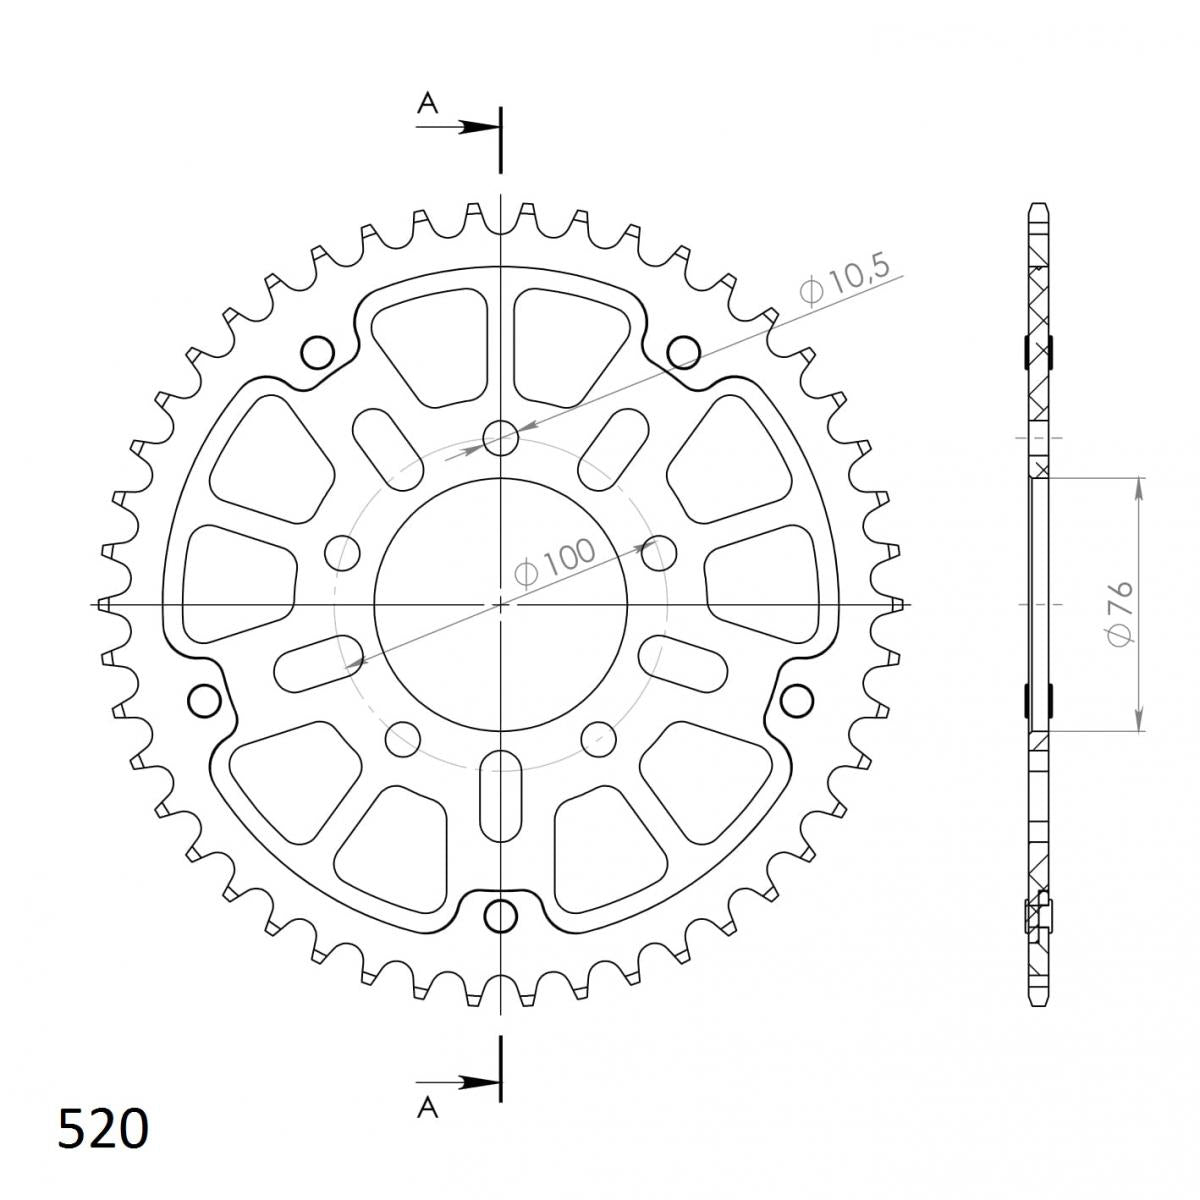 Supersprox Stealth 520 Pitch Rear Sprocket RST-7091 - (520, 76mm Centre, 100mm PCD)